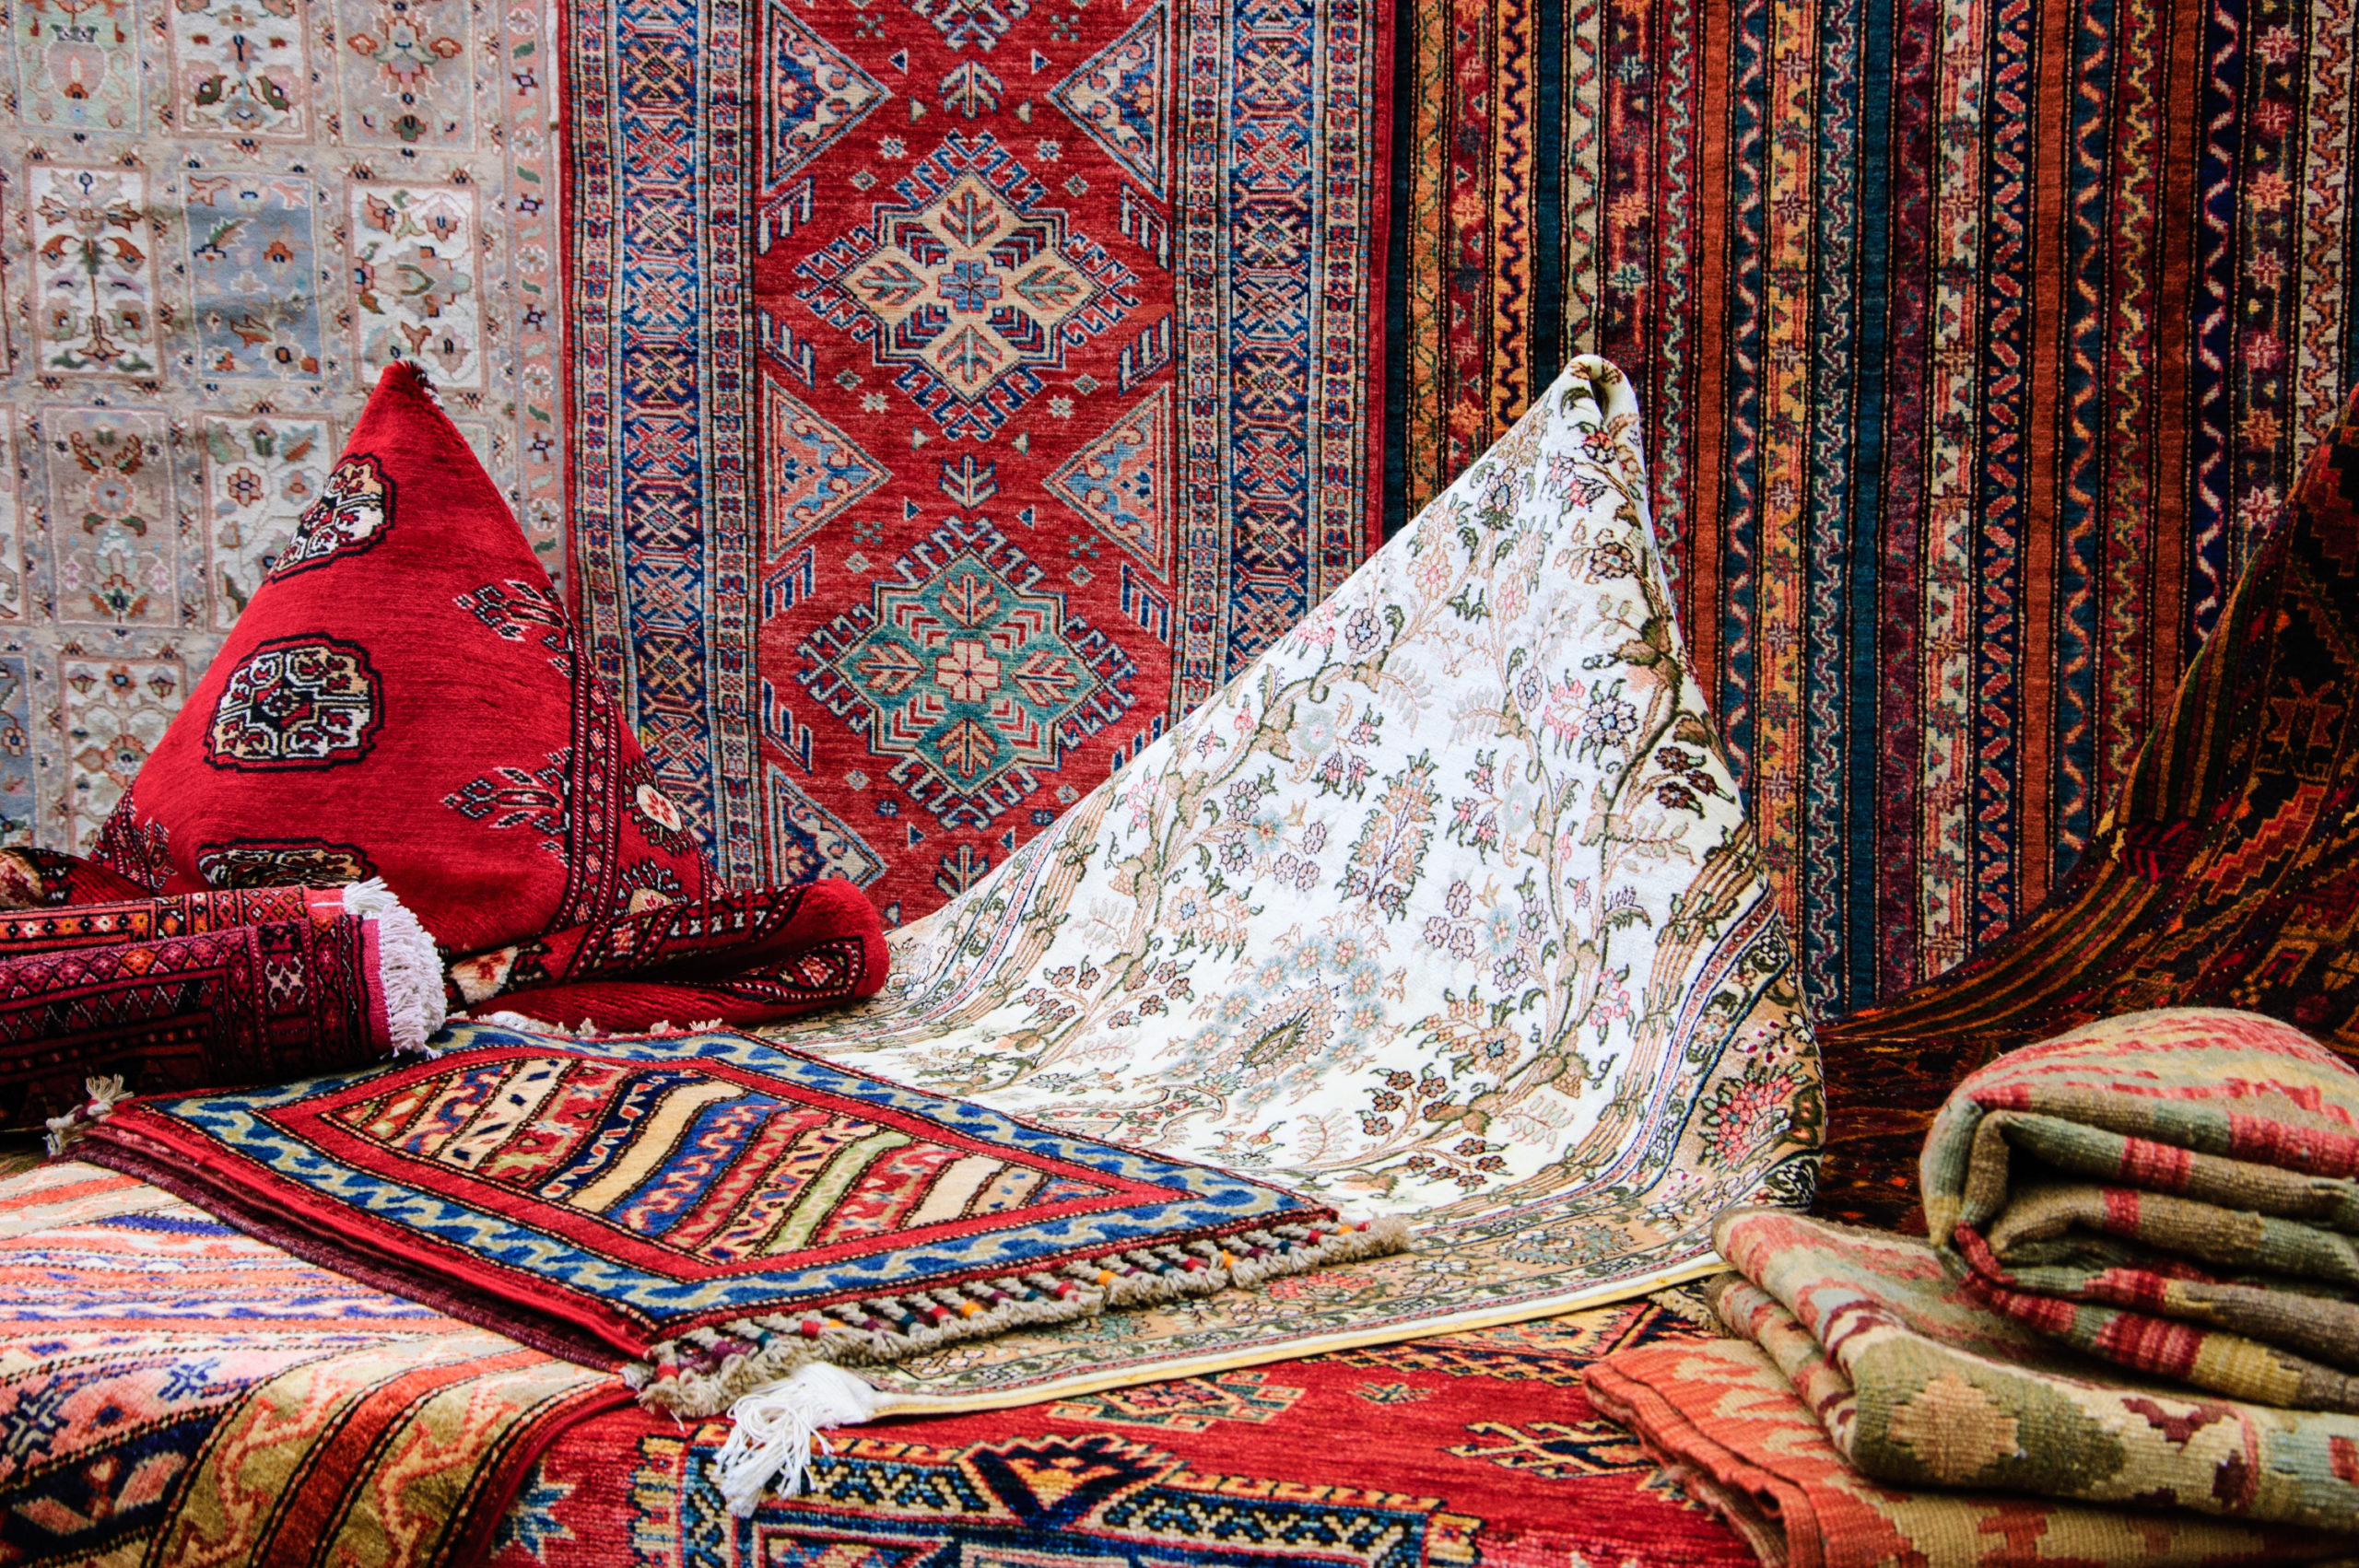 In this article, we’re rolling out the red carpet to introduce you to the history of Islamic art and textiles that made an impact in history.